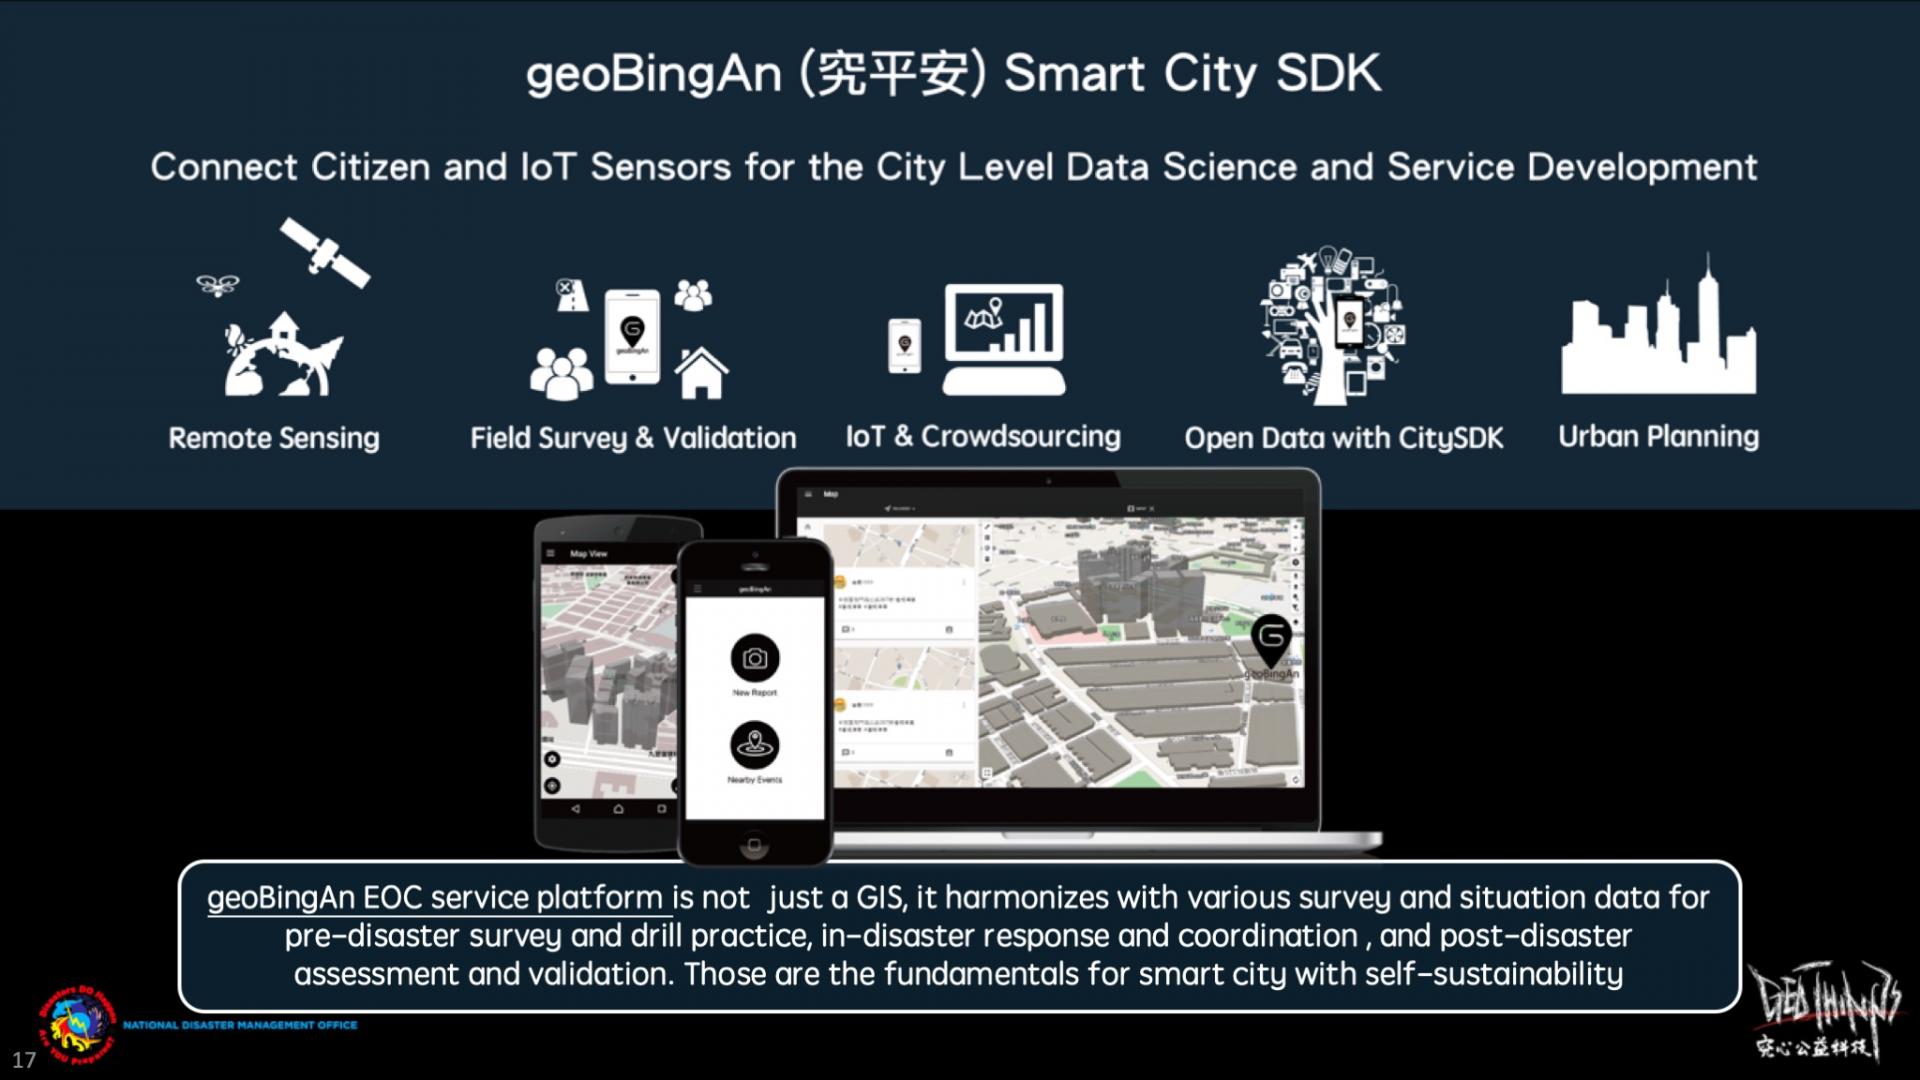 geoBingAn can be not only the EOC, but also the Smart City Service Development Kit platform for urban planning!